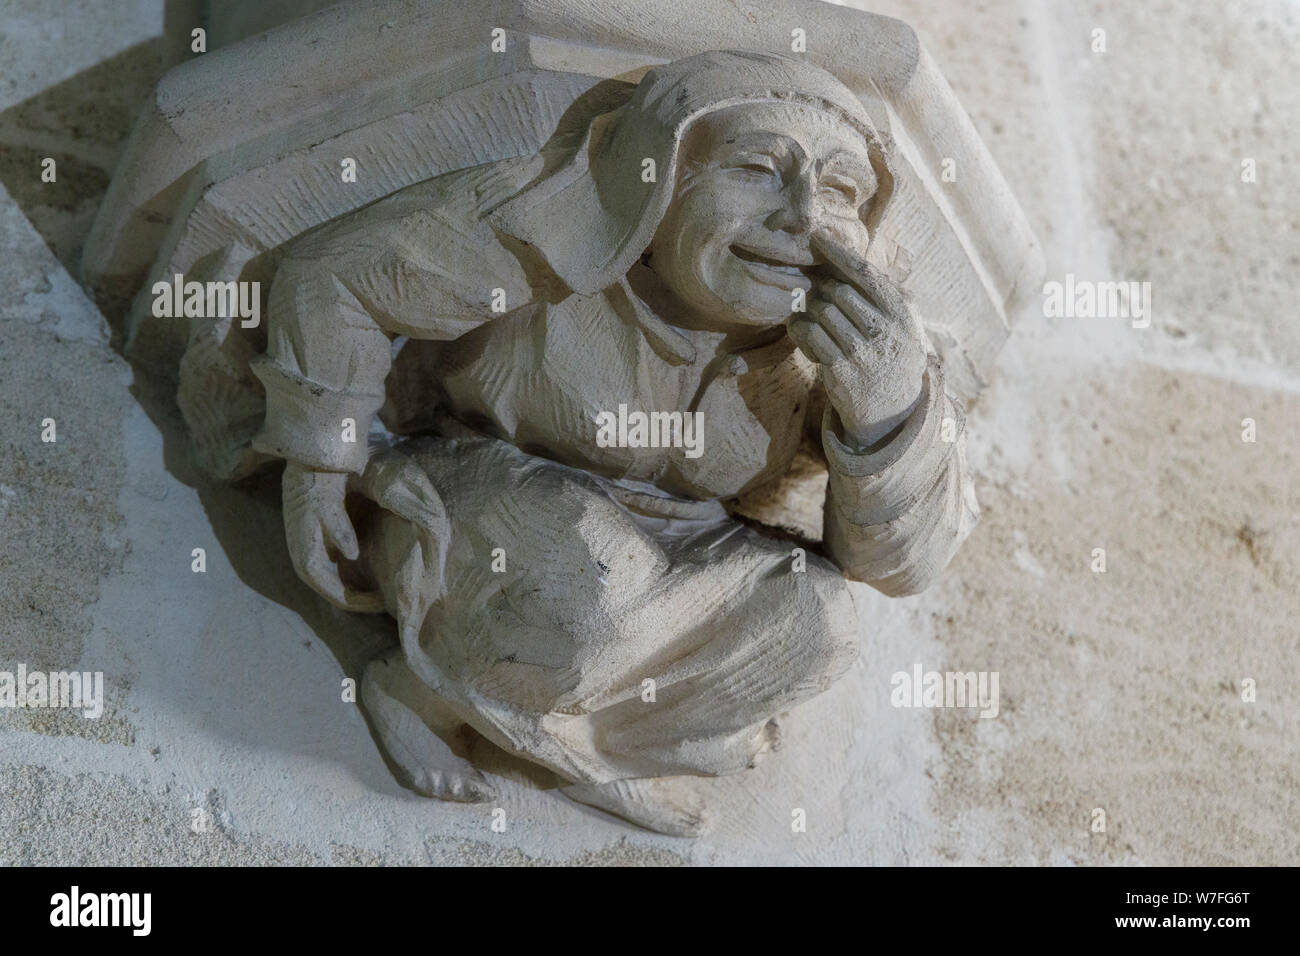 Irreverant gargoyle sculpture on the stairwell of Libourne Town Hall, Bordeaux, Nouvelle-Aquitaine, France. Friar picking his nose. Stock Photo